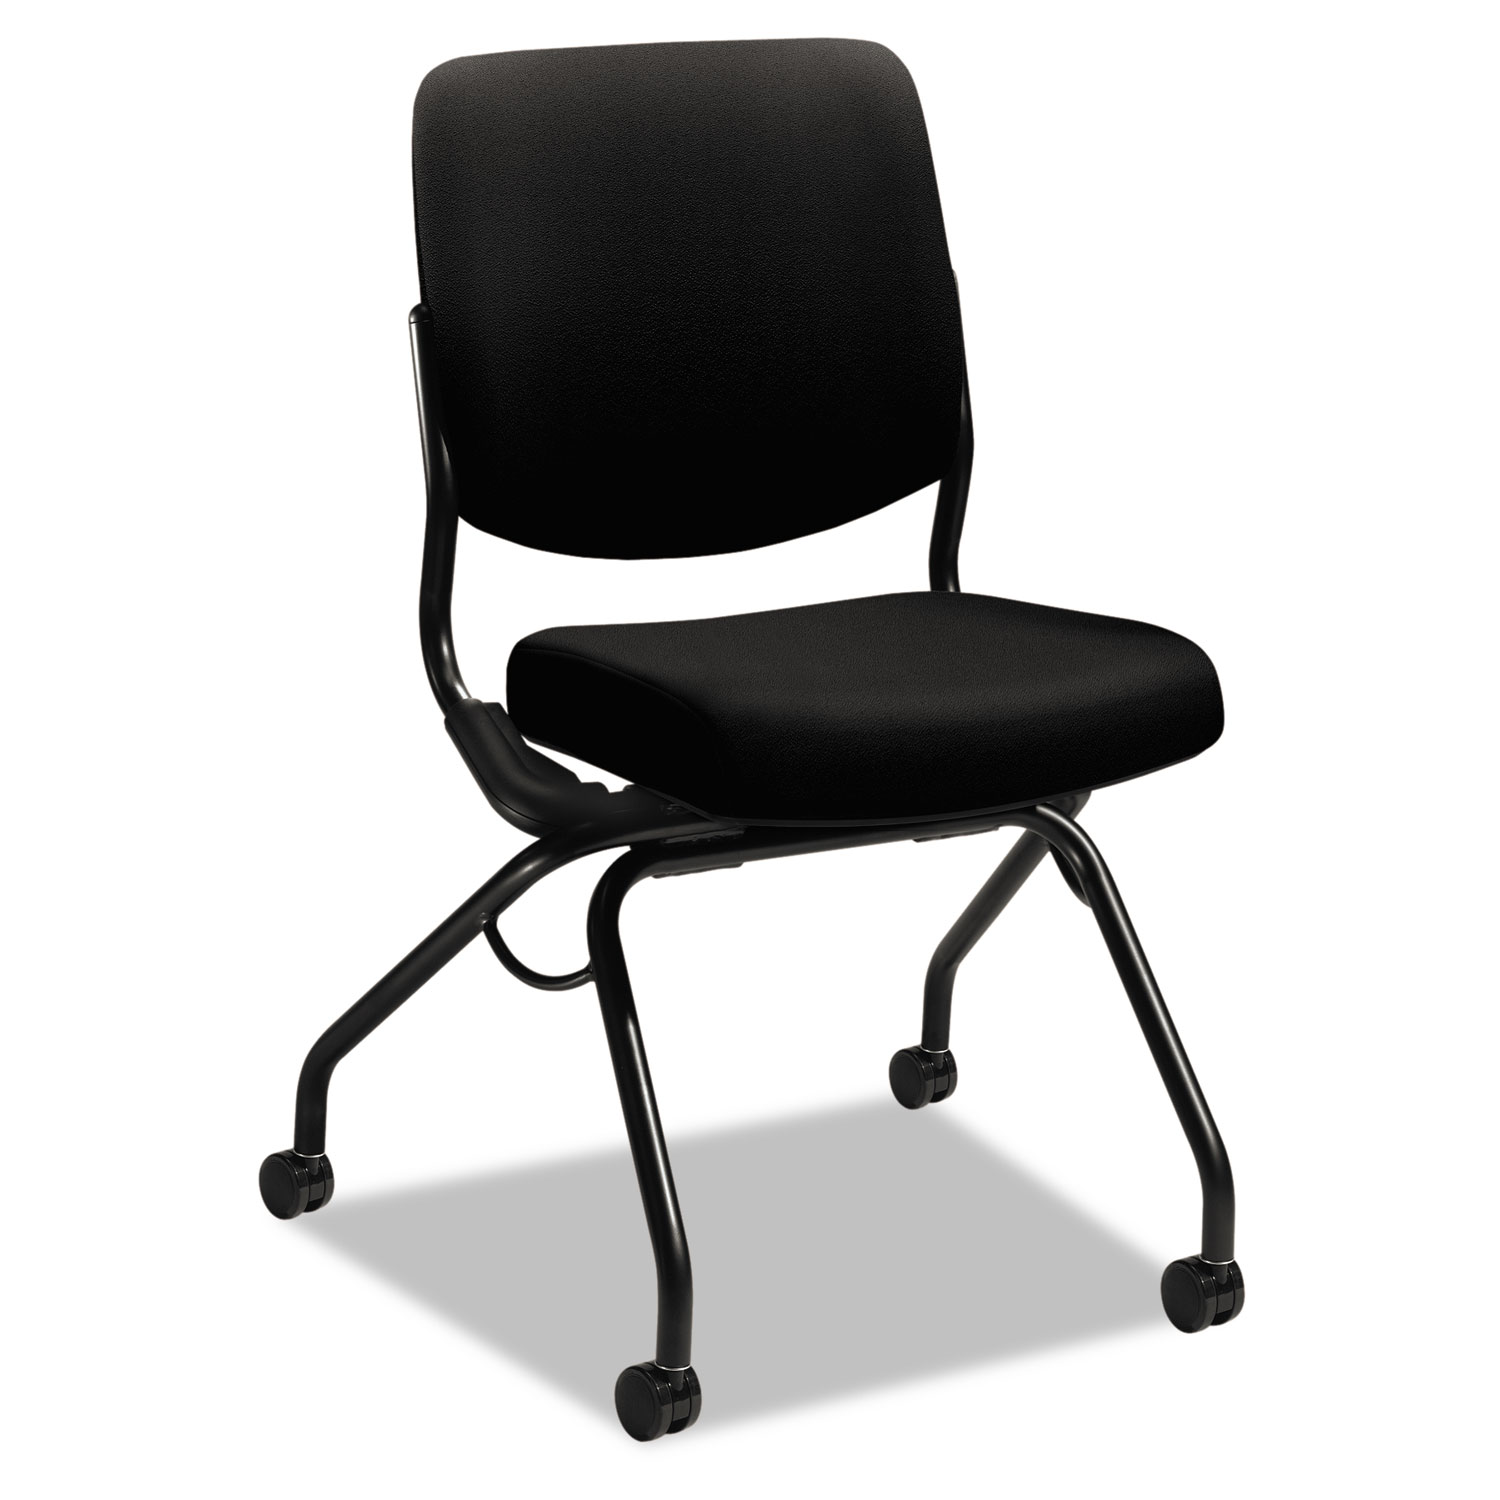 Perpetual Series Mobile Nesting Chair, Black Upholstery